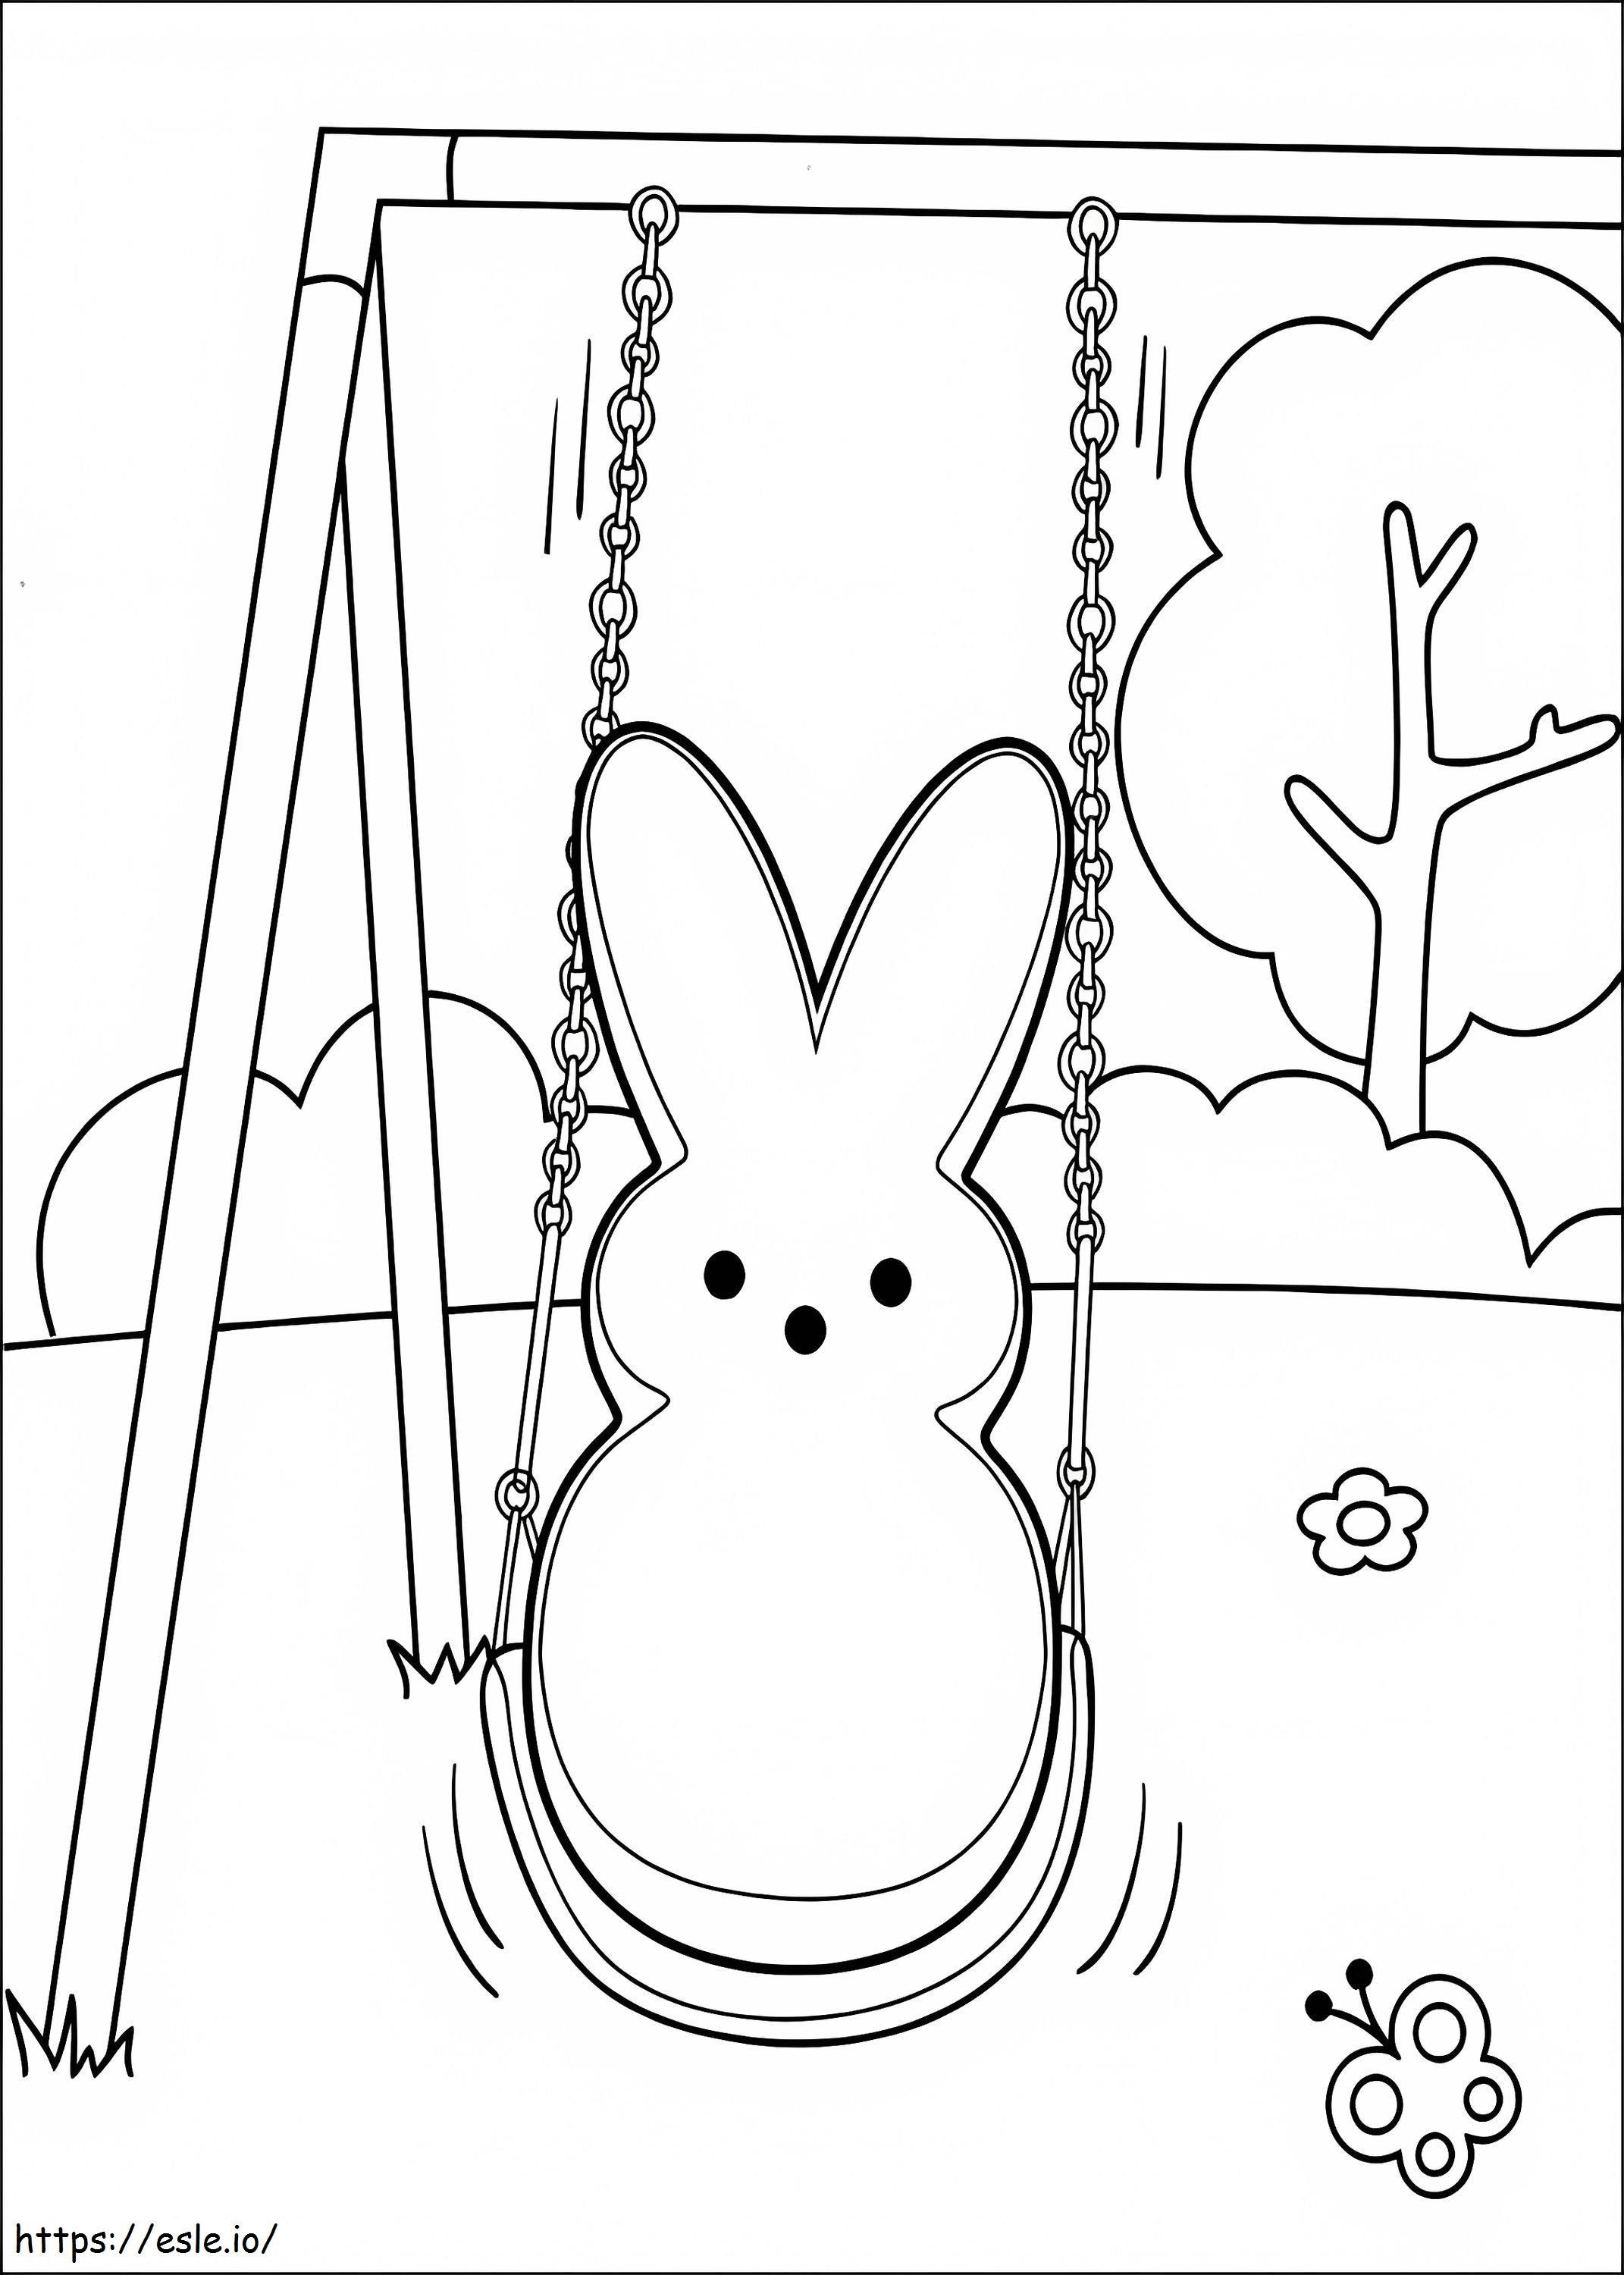 Rabbit Marshmallow Peeps coloring page